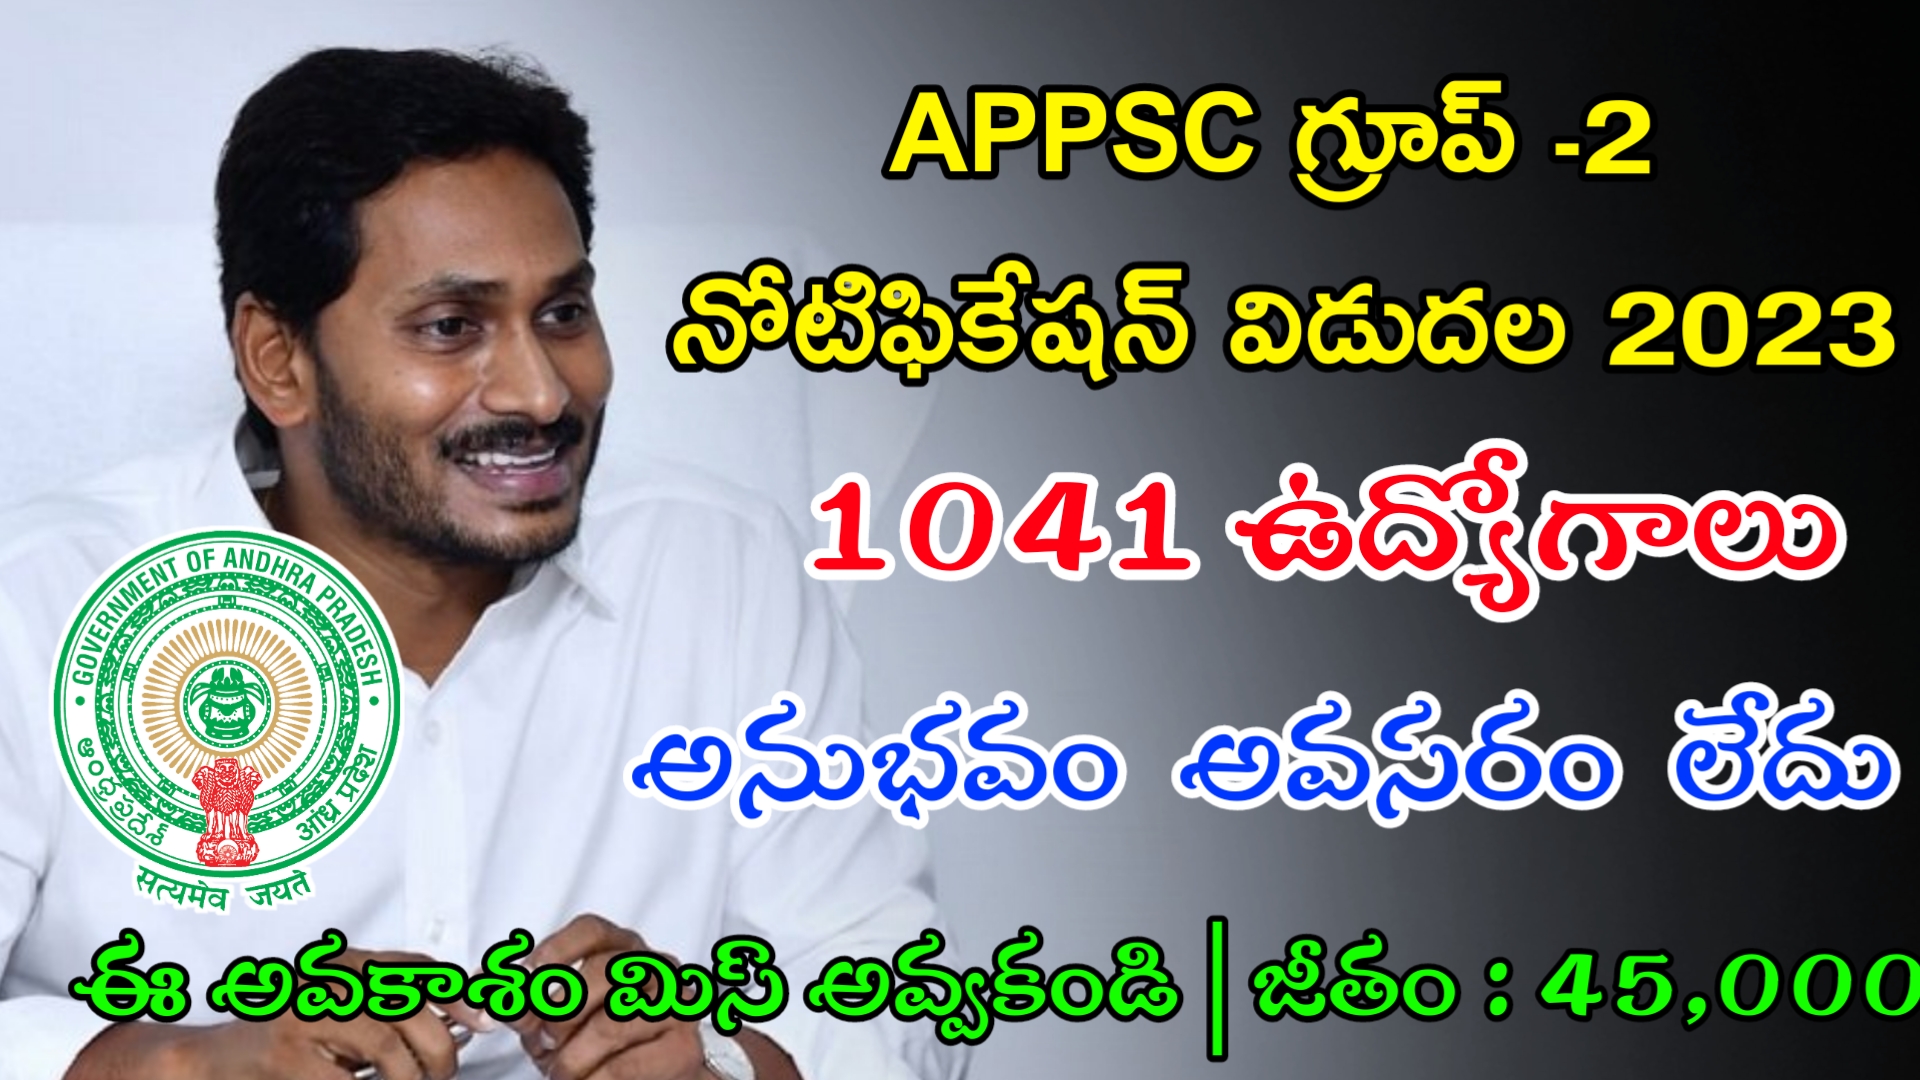 Appsc group 2 Notification 2023 AP Group 2 Notification